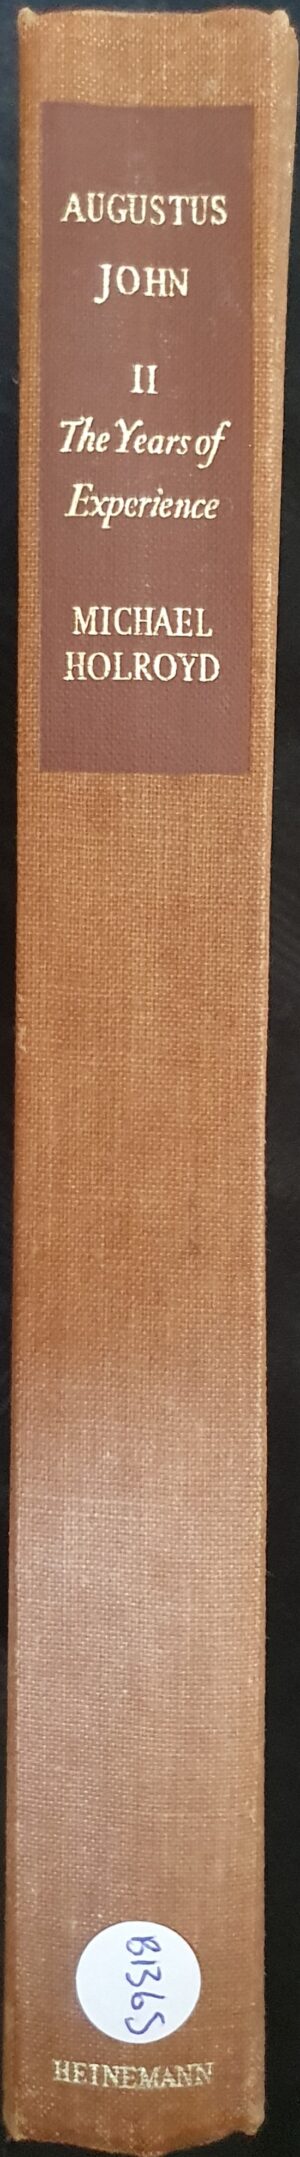 Augustus John a Biography, Volume II The Years of Experience Michael Holroyd spine